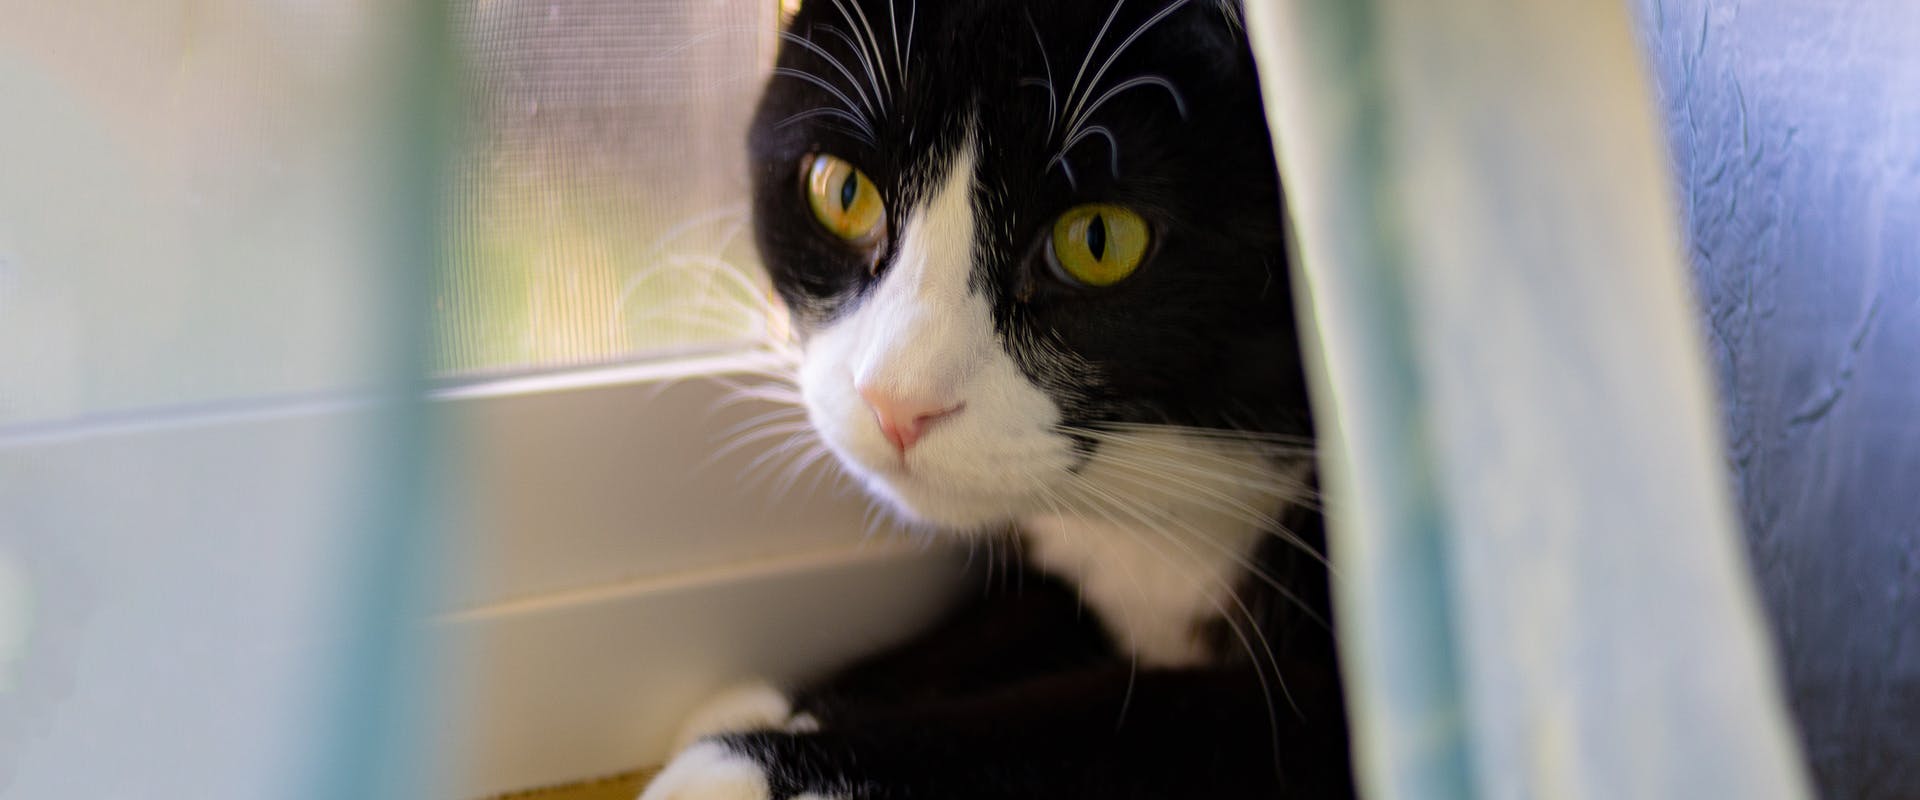 Tuxedo cat names - a black and white cat peering out from a curtain